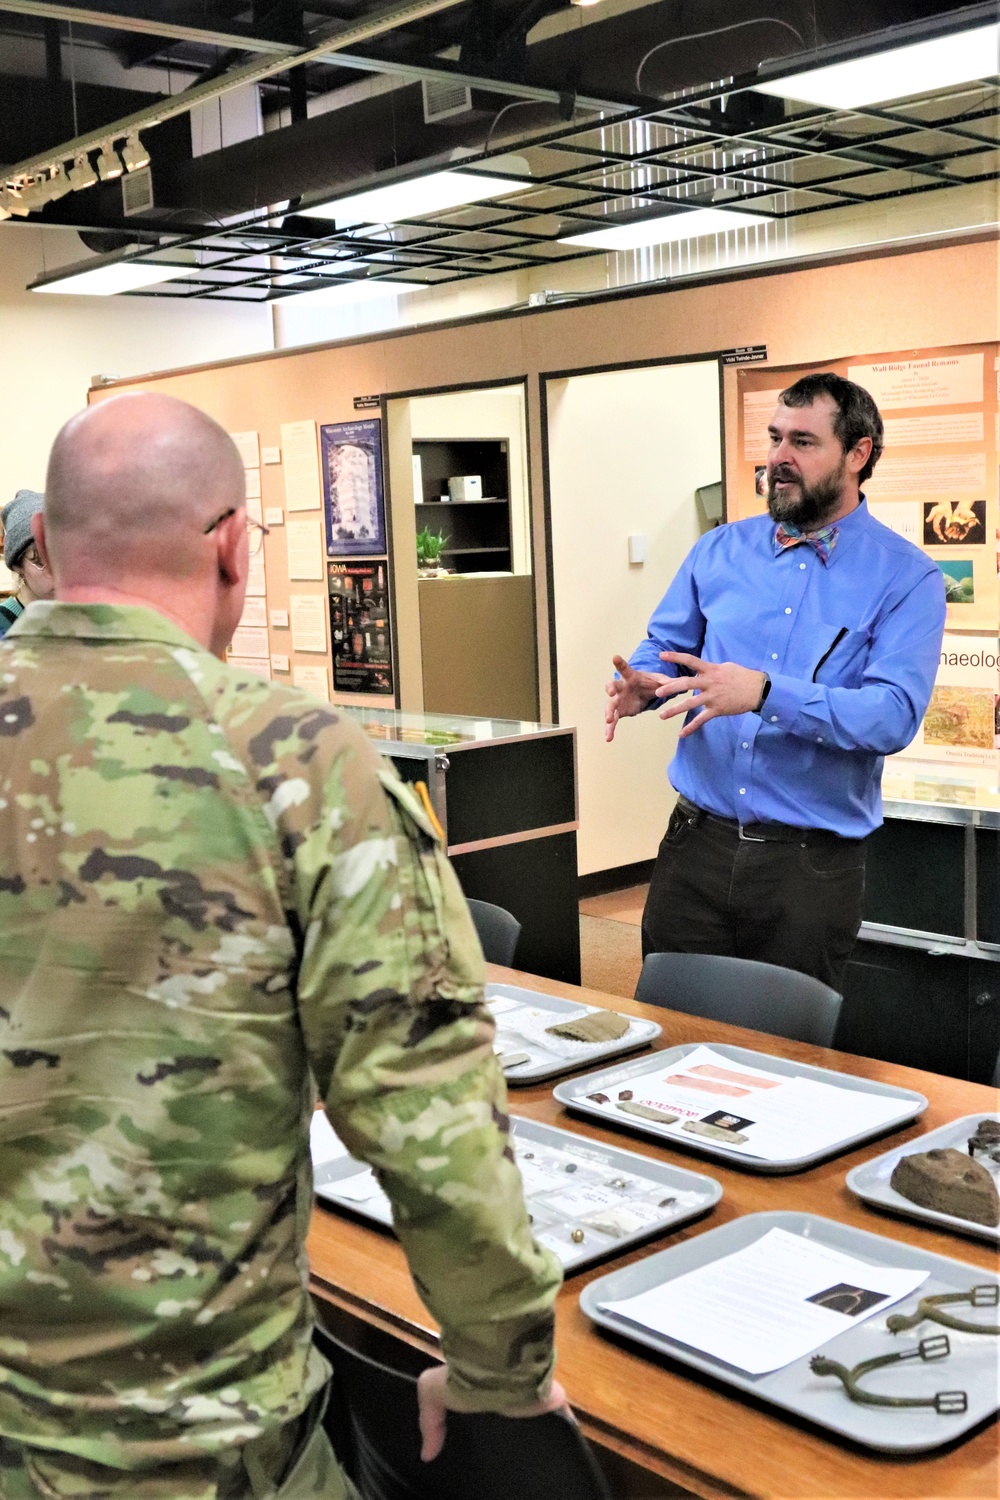 Fort McCoy leaders visit Mississippi Valley Archaeology Center; learn about curation of Fort McCoy artifacts